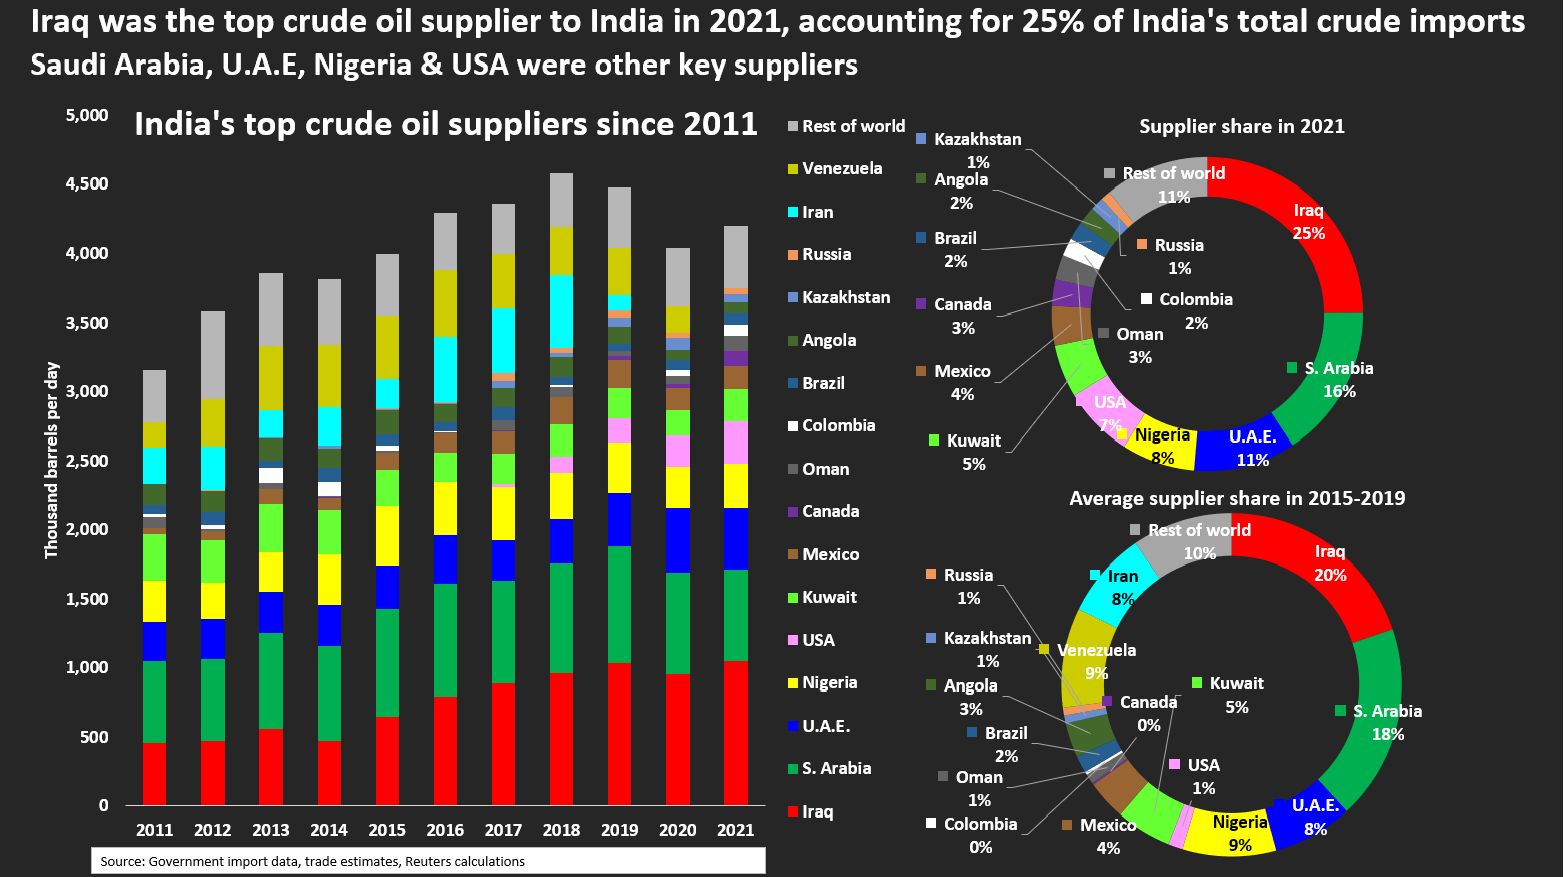 India’s top crude oil suppliers since 2011